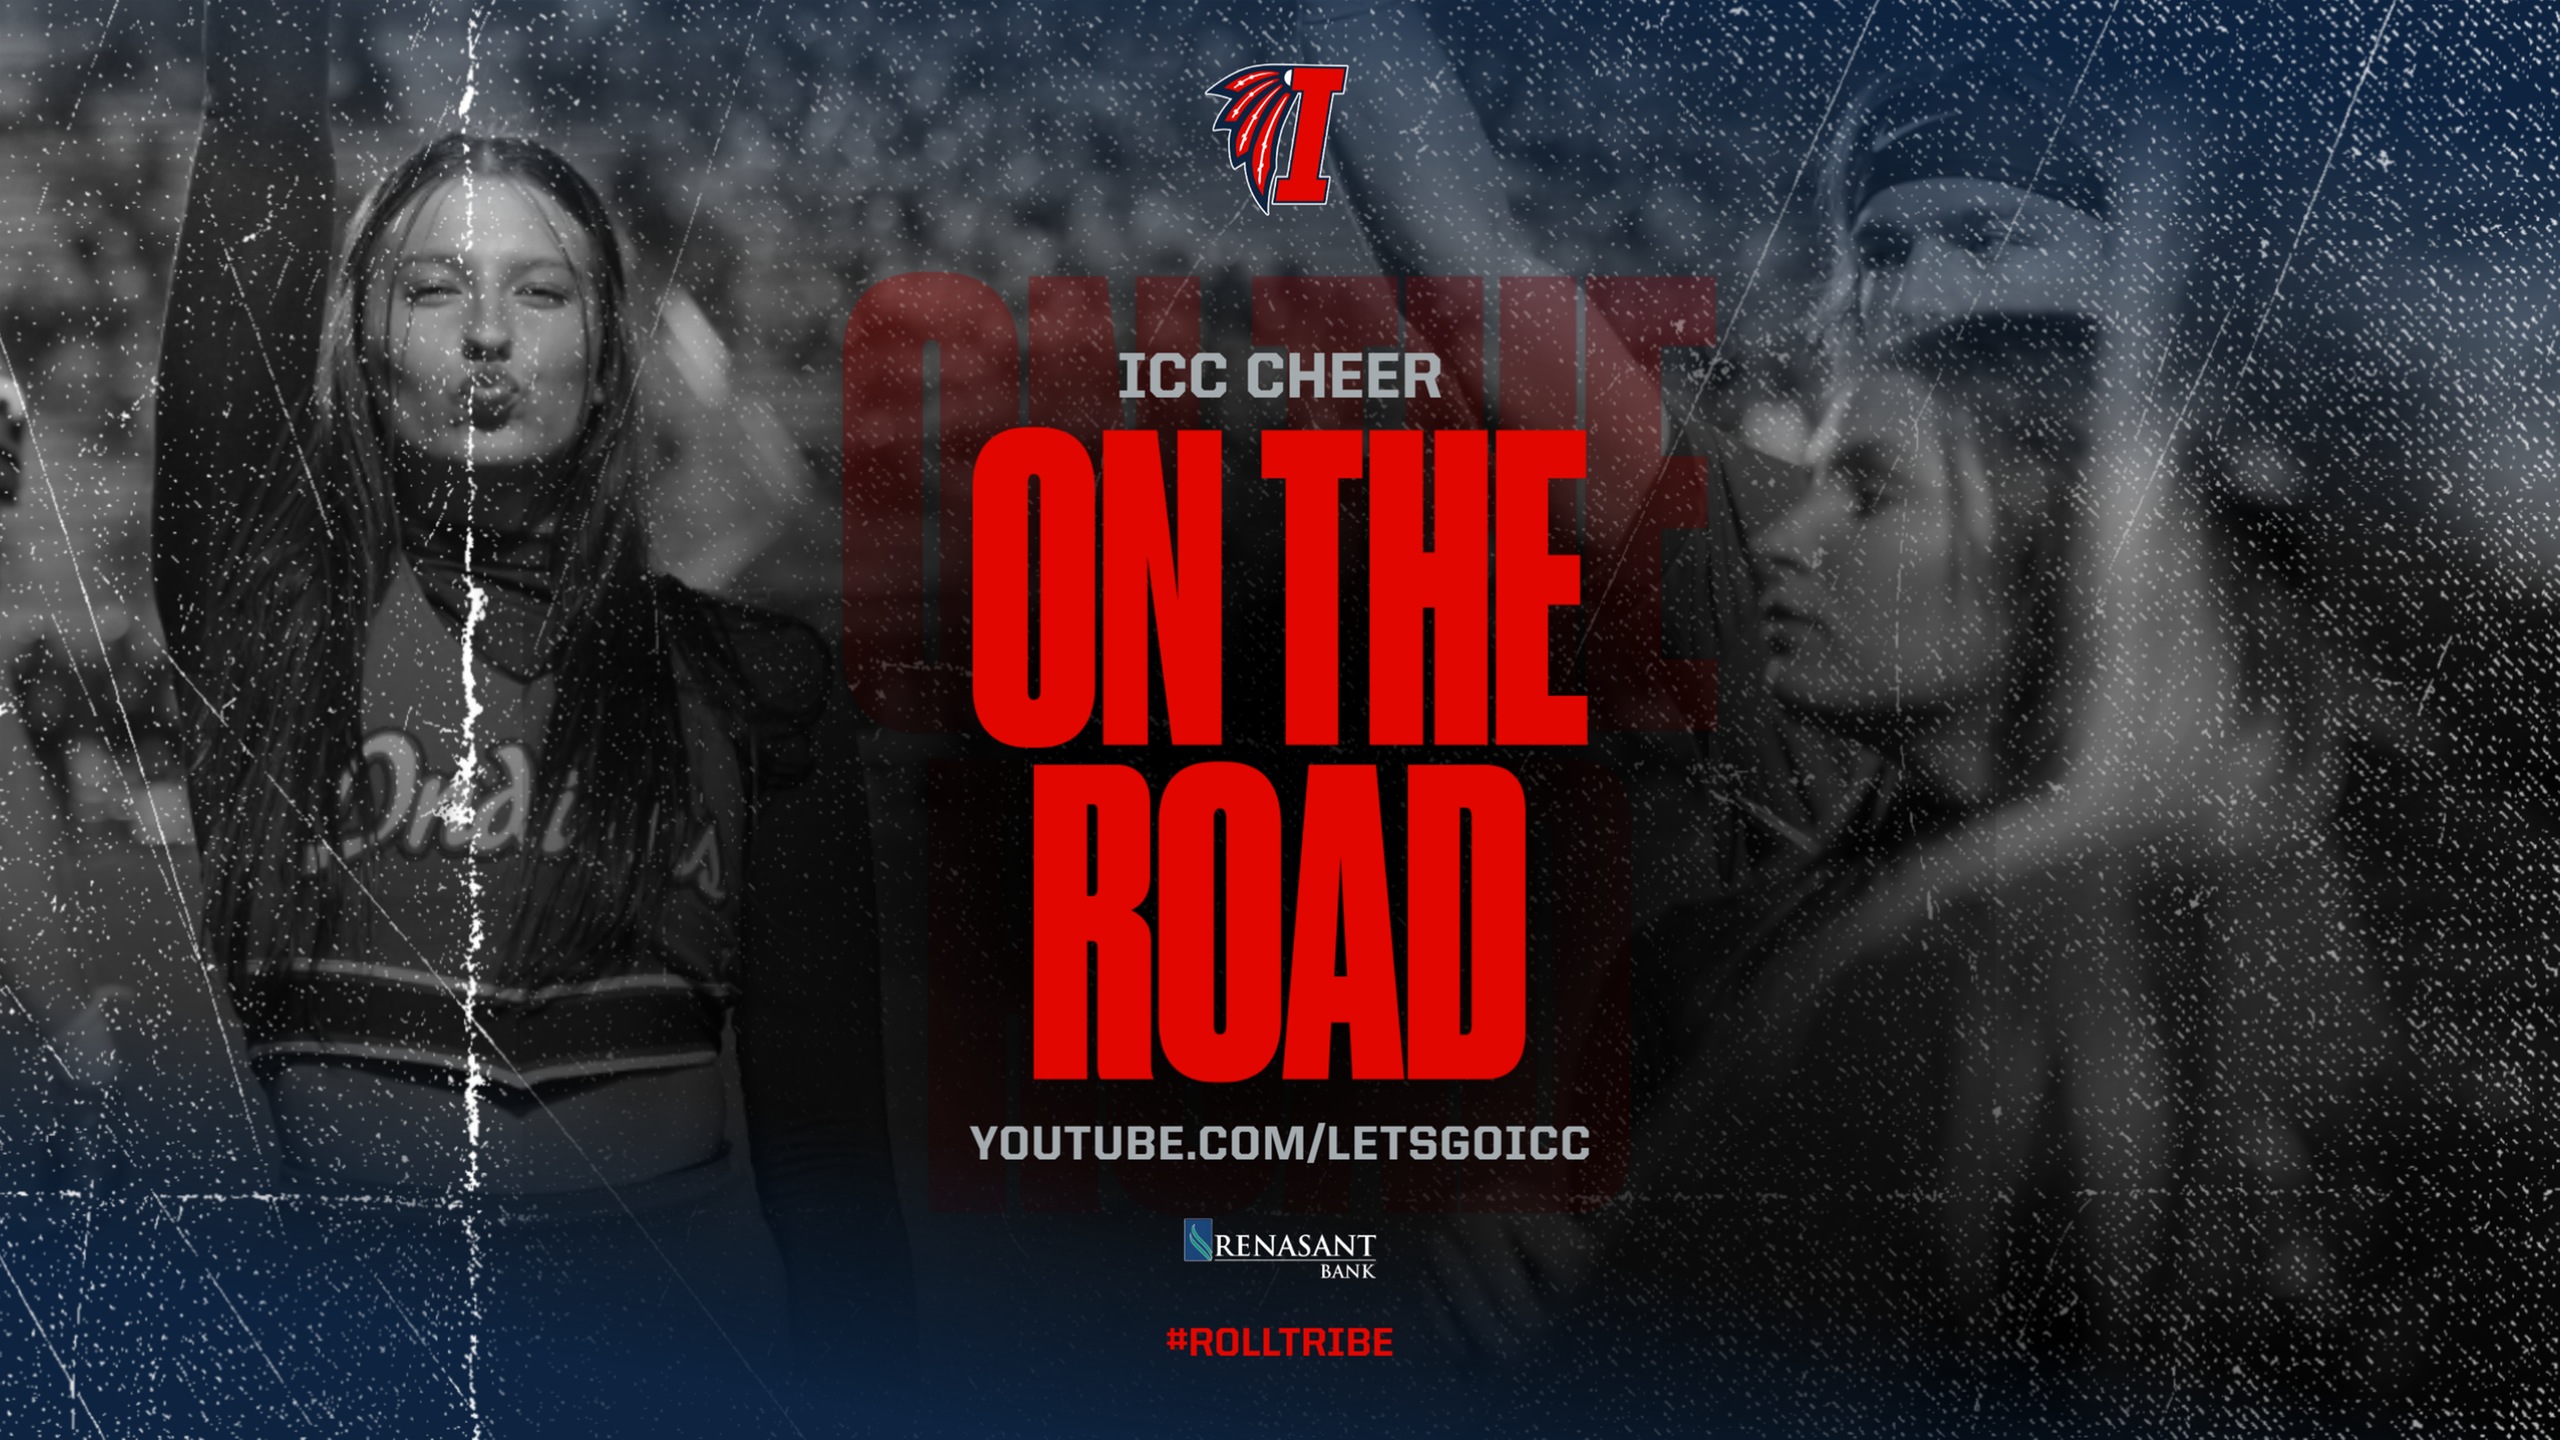 On the Road: ICC Cheer